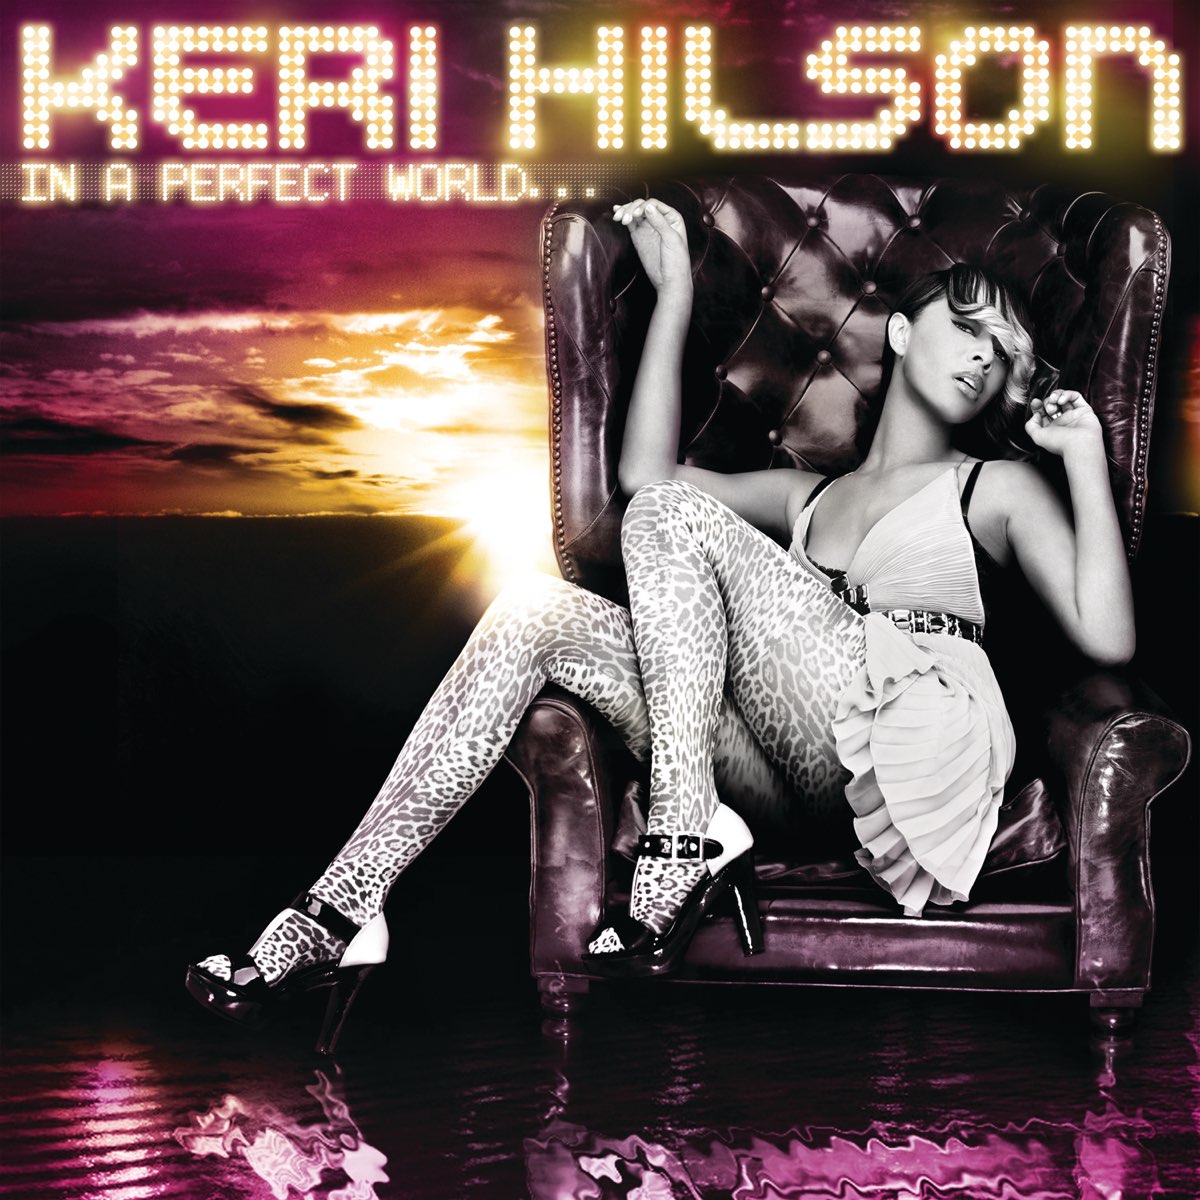 Keri Hilson In a Perfect World... cover artwork